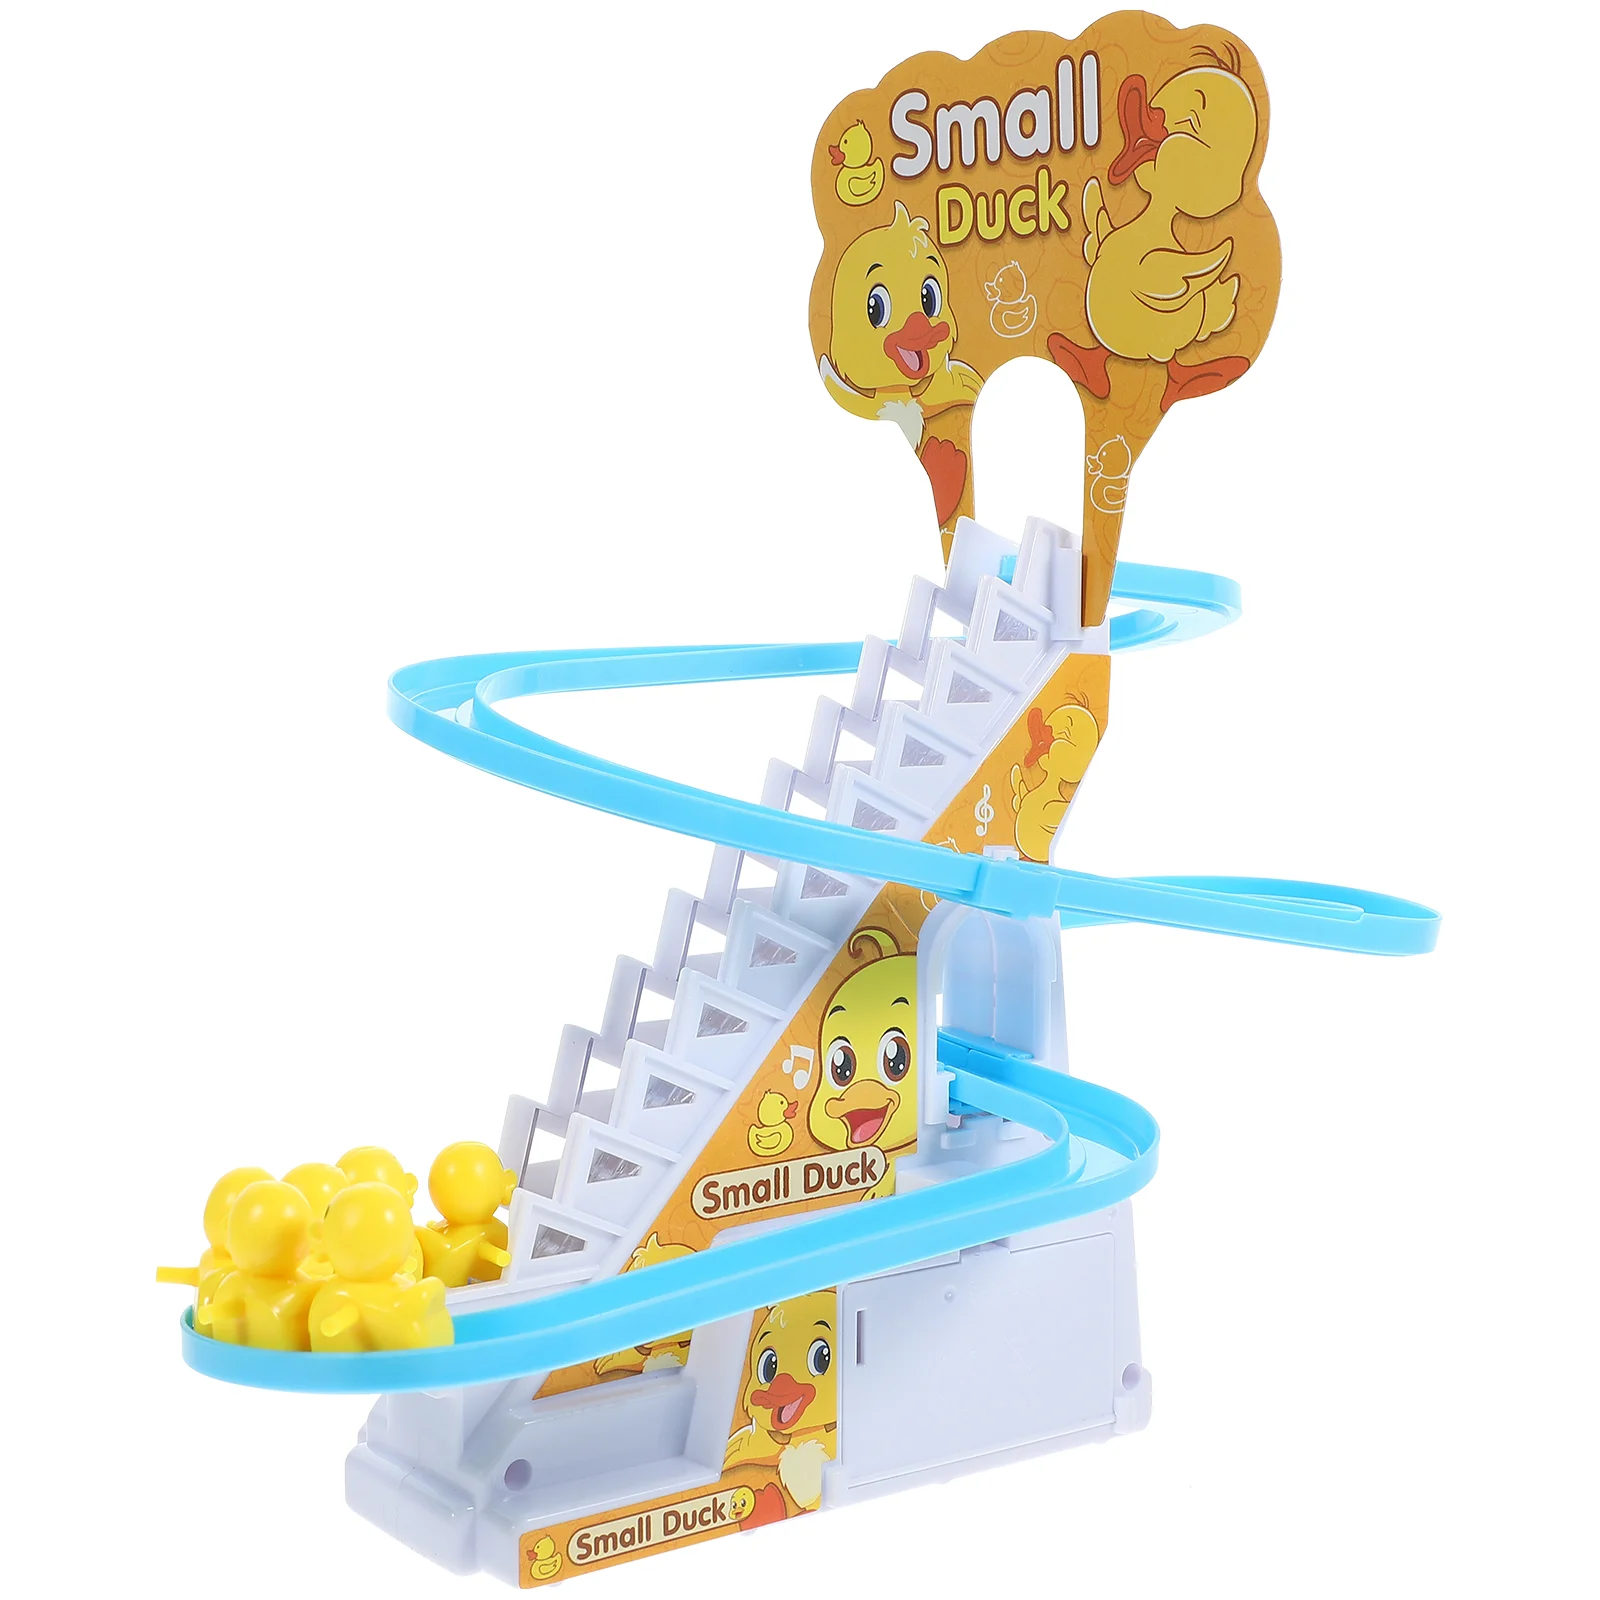 

Toy Duck Toys Slide Climb Track Stair Kids Stairs Electric Coaster Roller Climbing Old Year Boy Educational Children Duckling